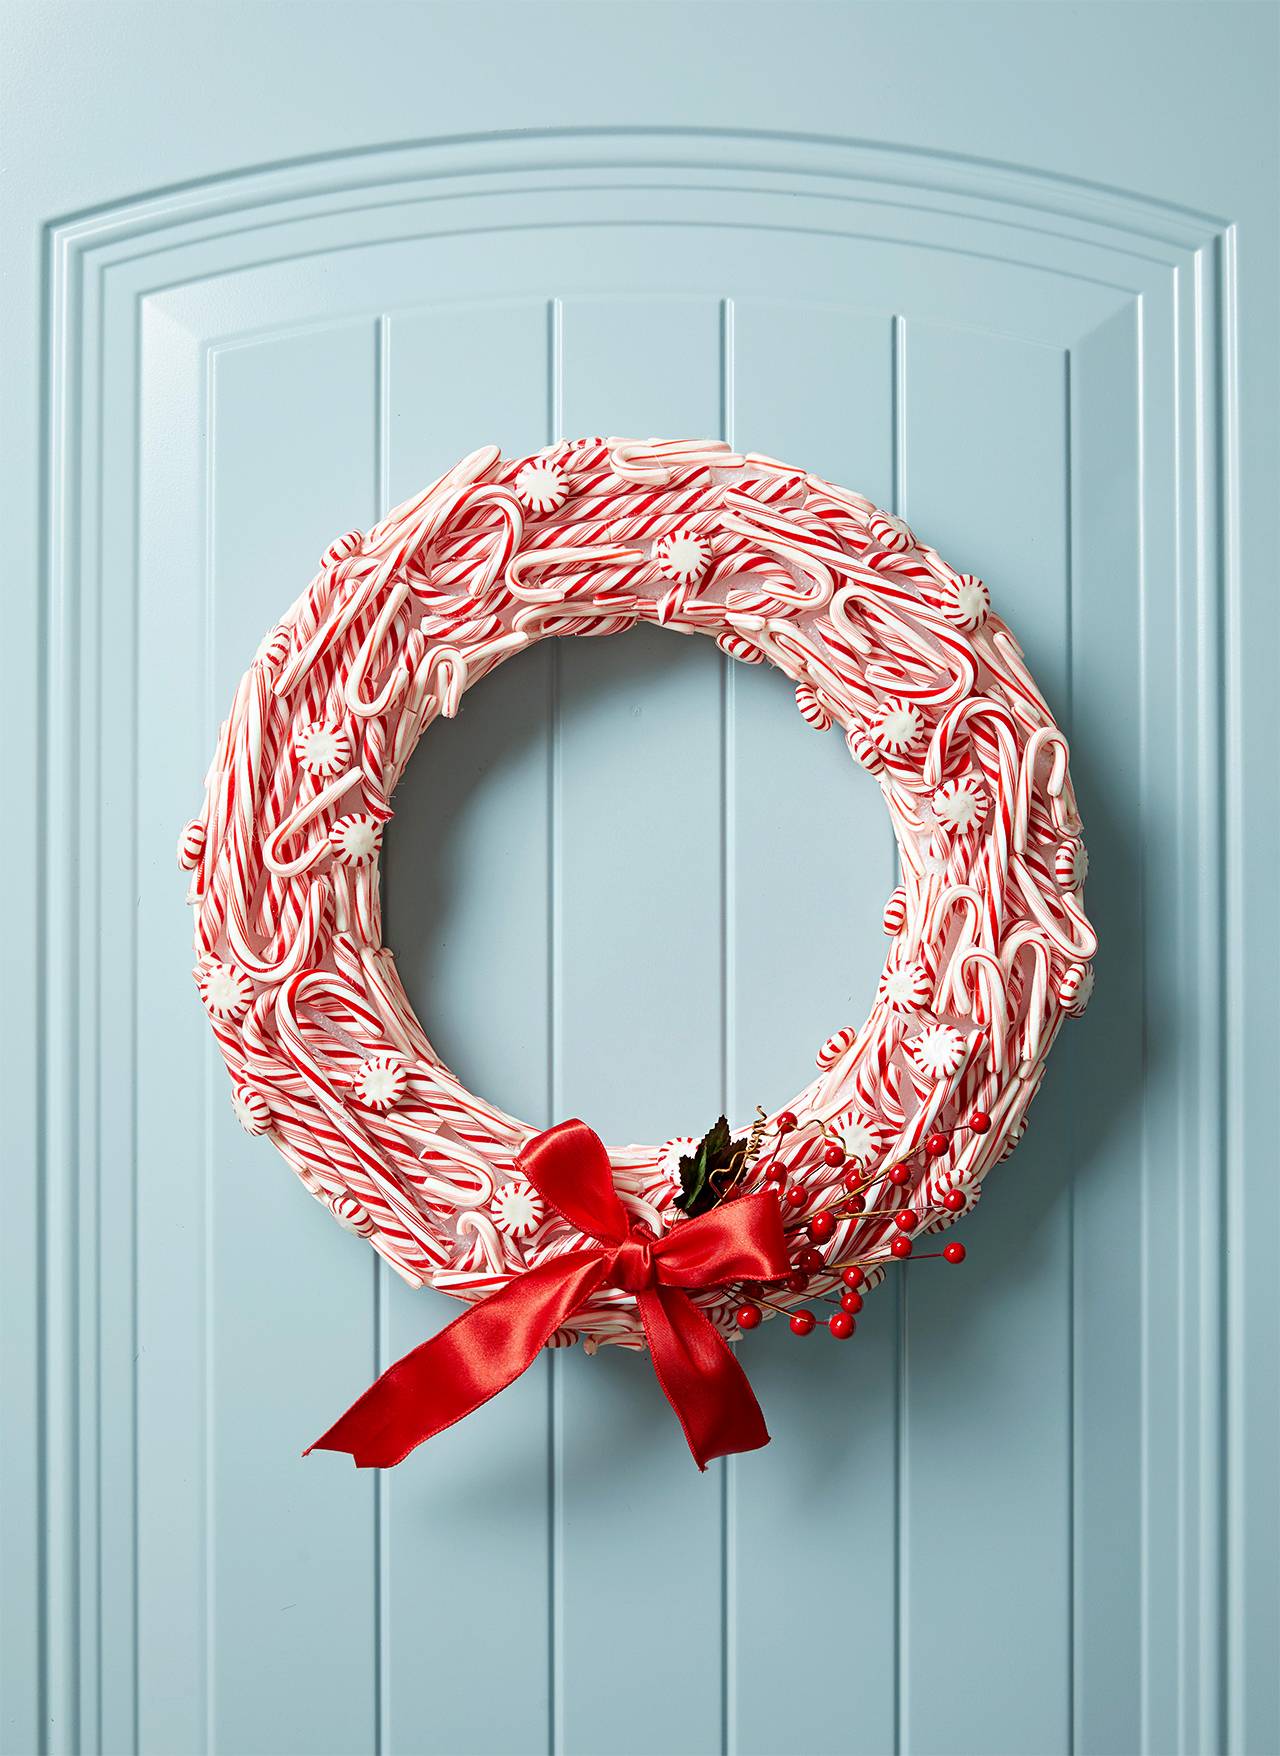 Adorable wreath made of candy canes (from BHG)